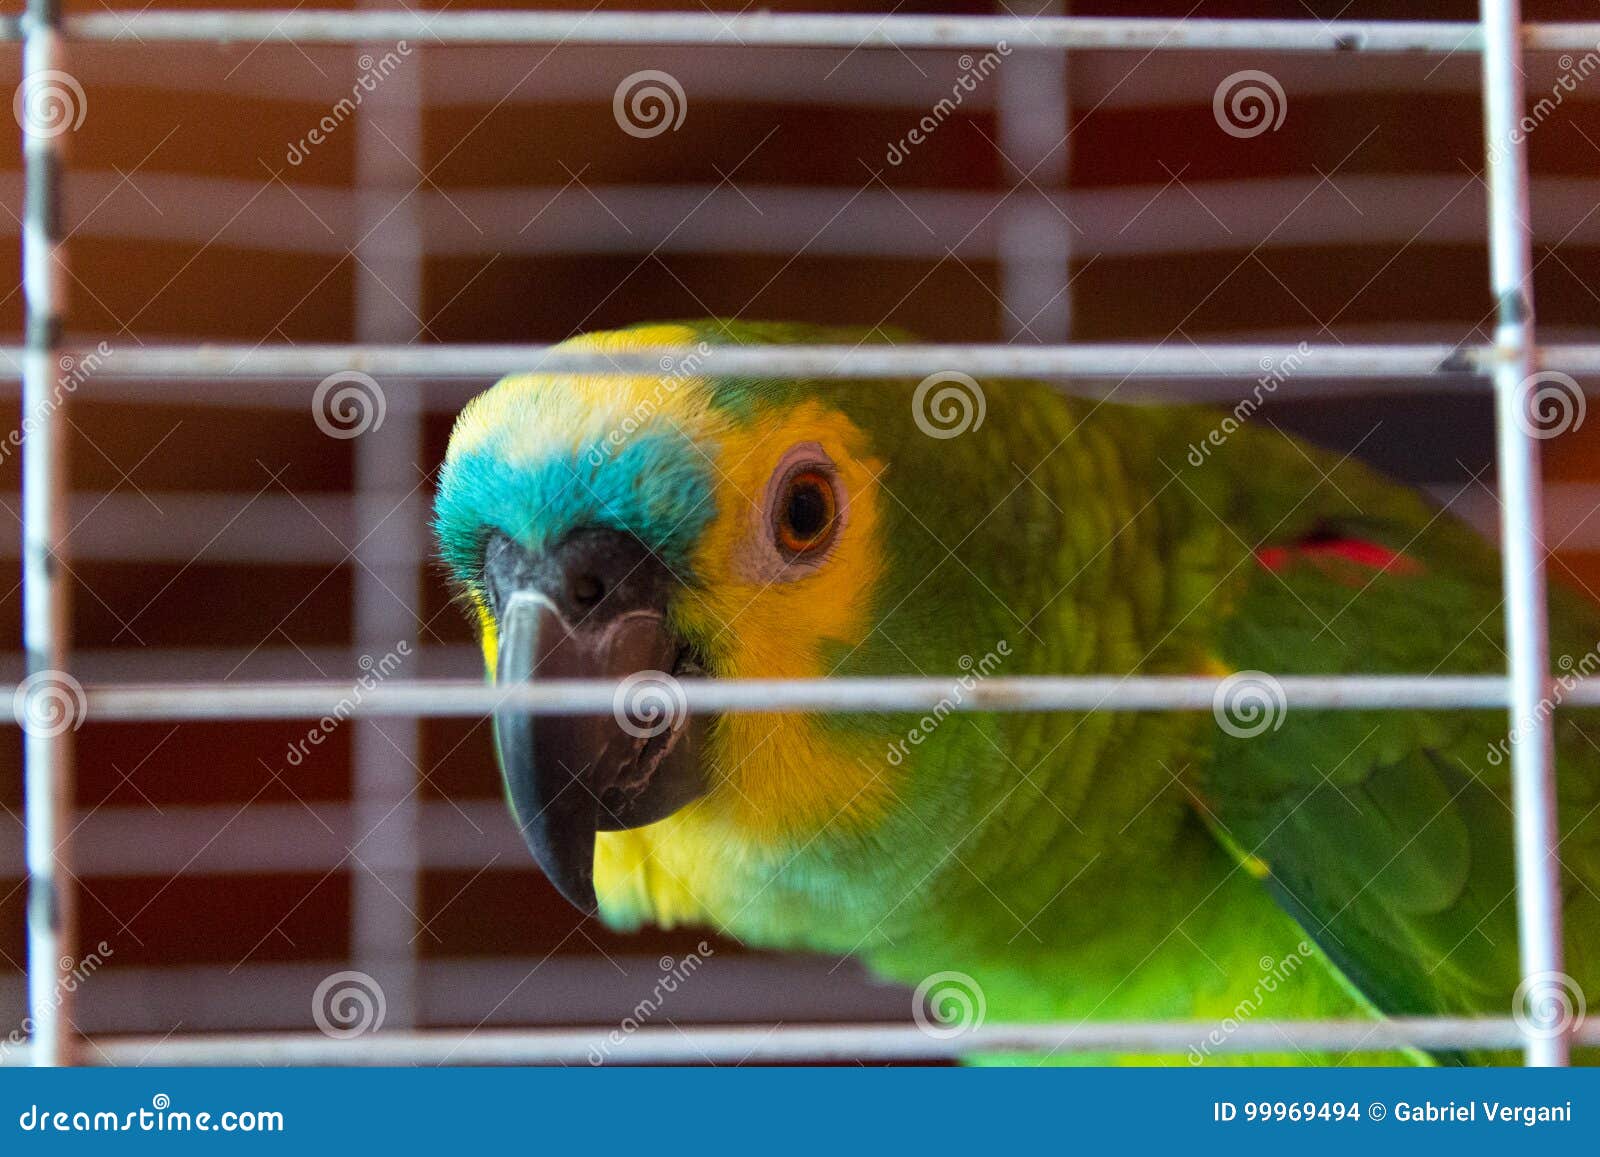 parrot trapped. concept of illegal trafficking and smuggling